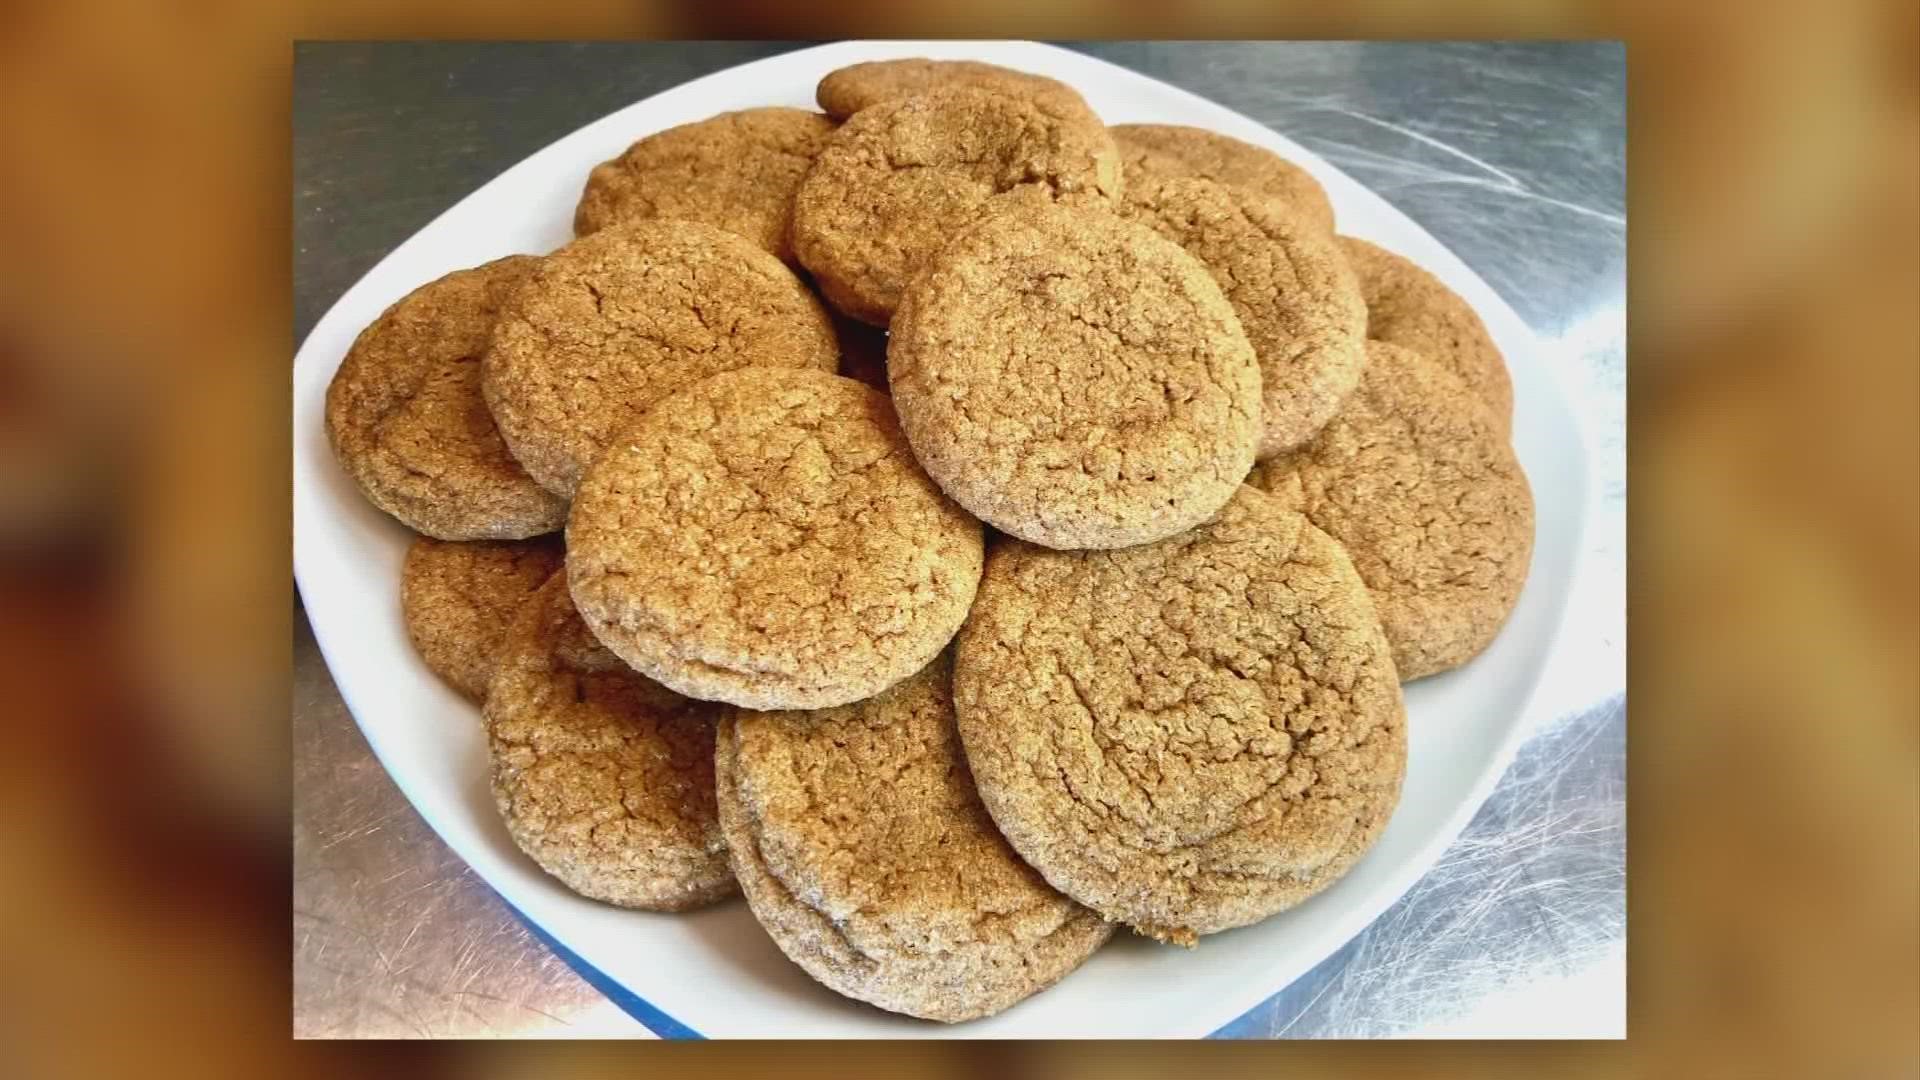 Gingerbread cookies are a perfect fall dessert.